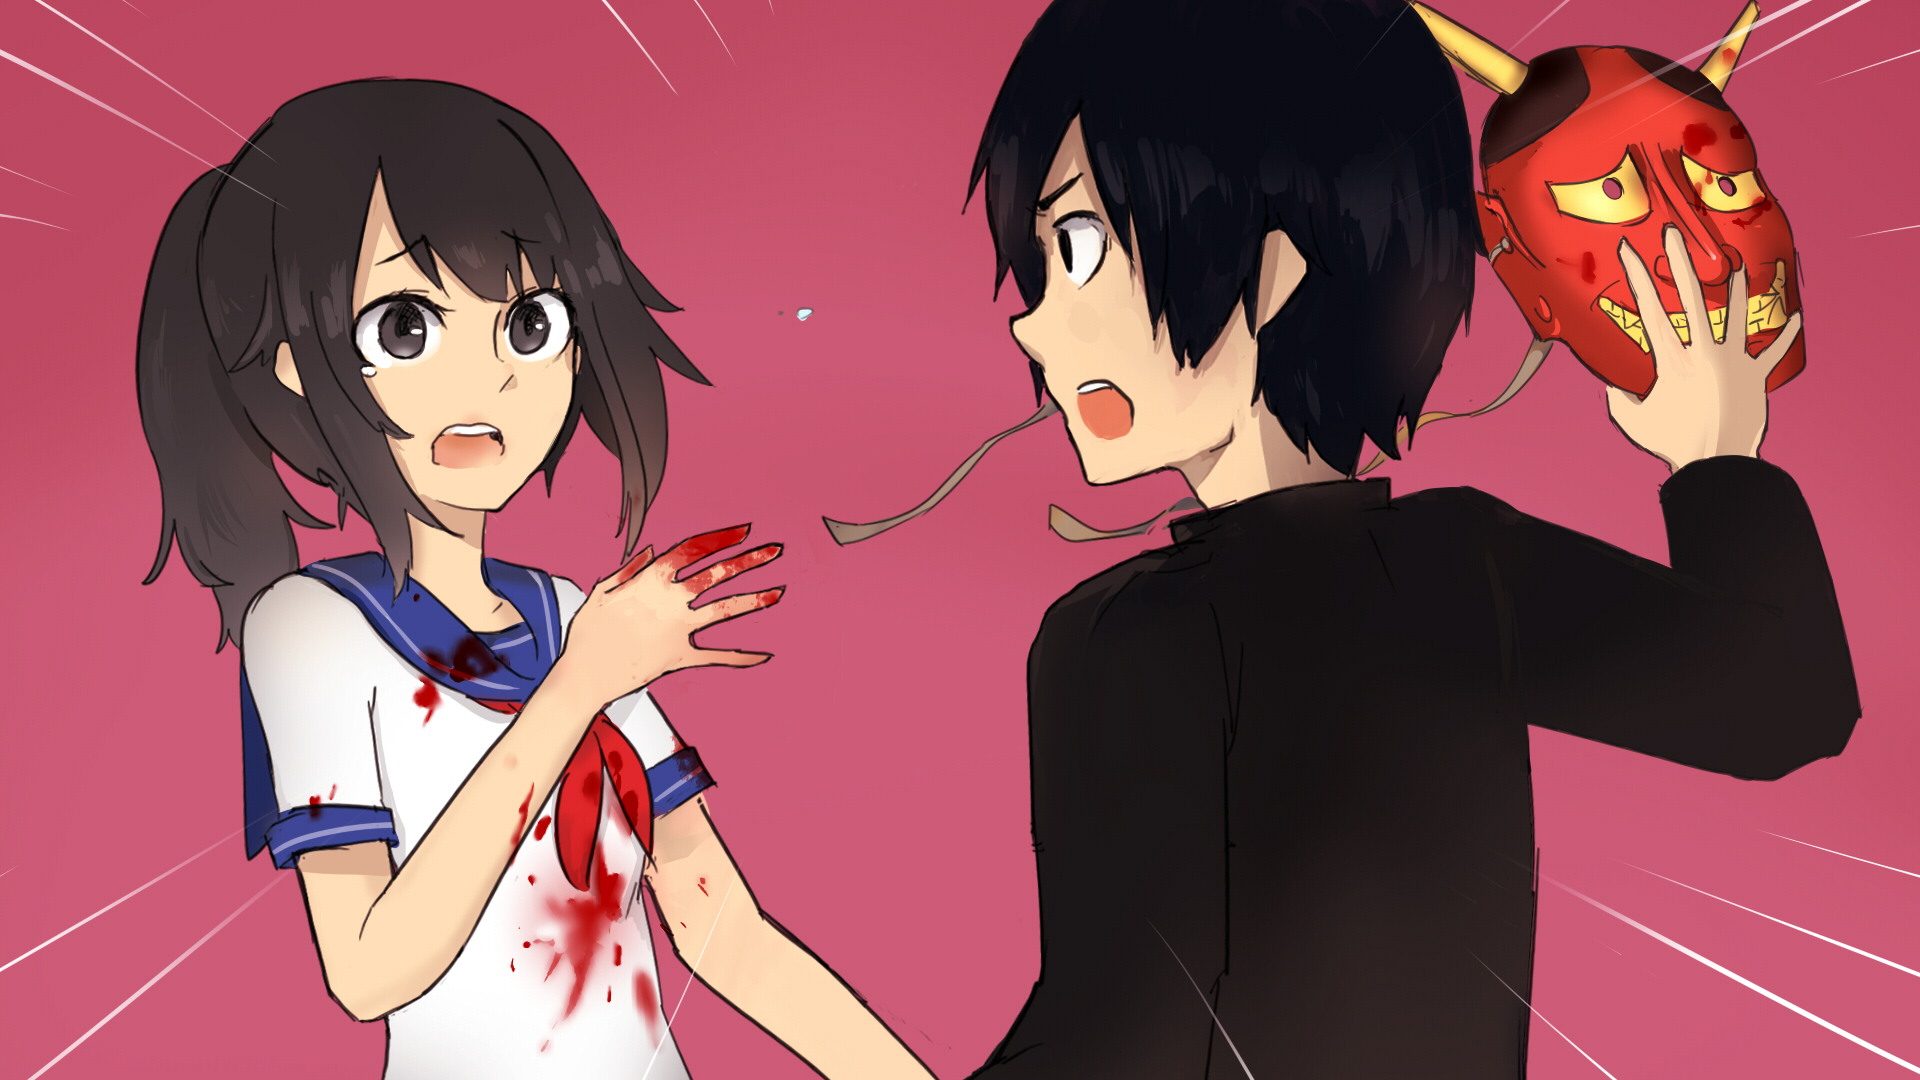 Nice Images Collection: Yandere Simulator Desktop Wallpapers